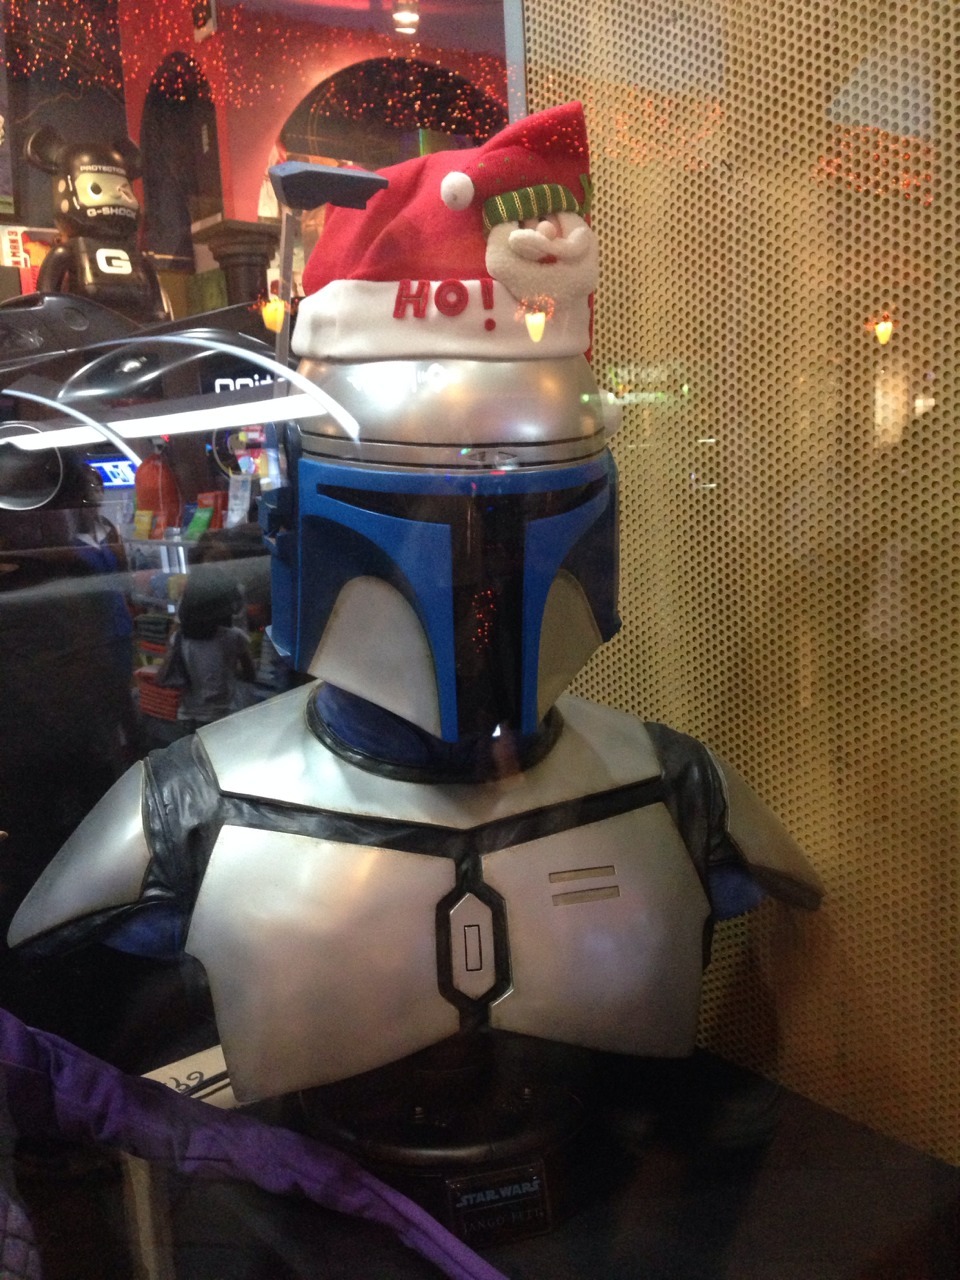 Jingle Fett, the Bounty Hunter who Fragged Christmas. Succeeded after his death by